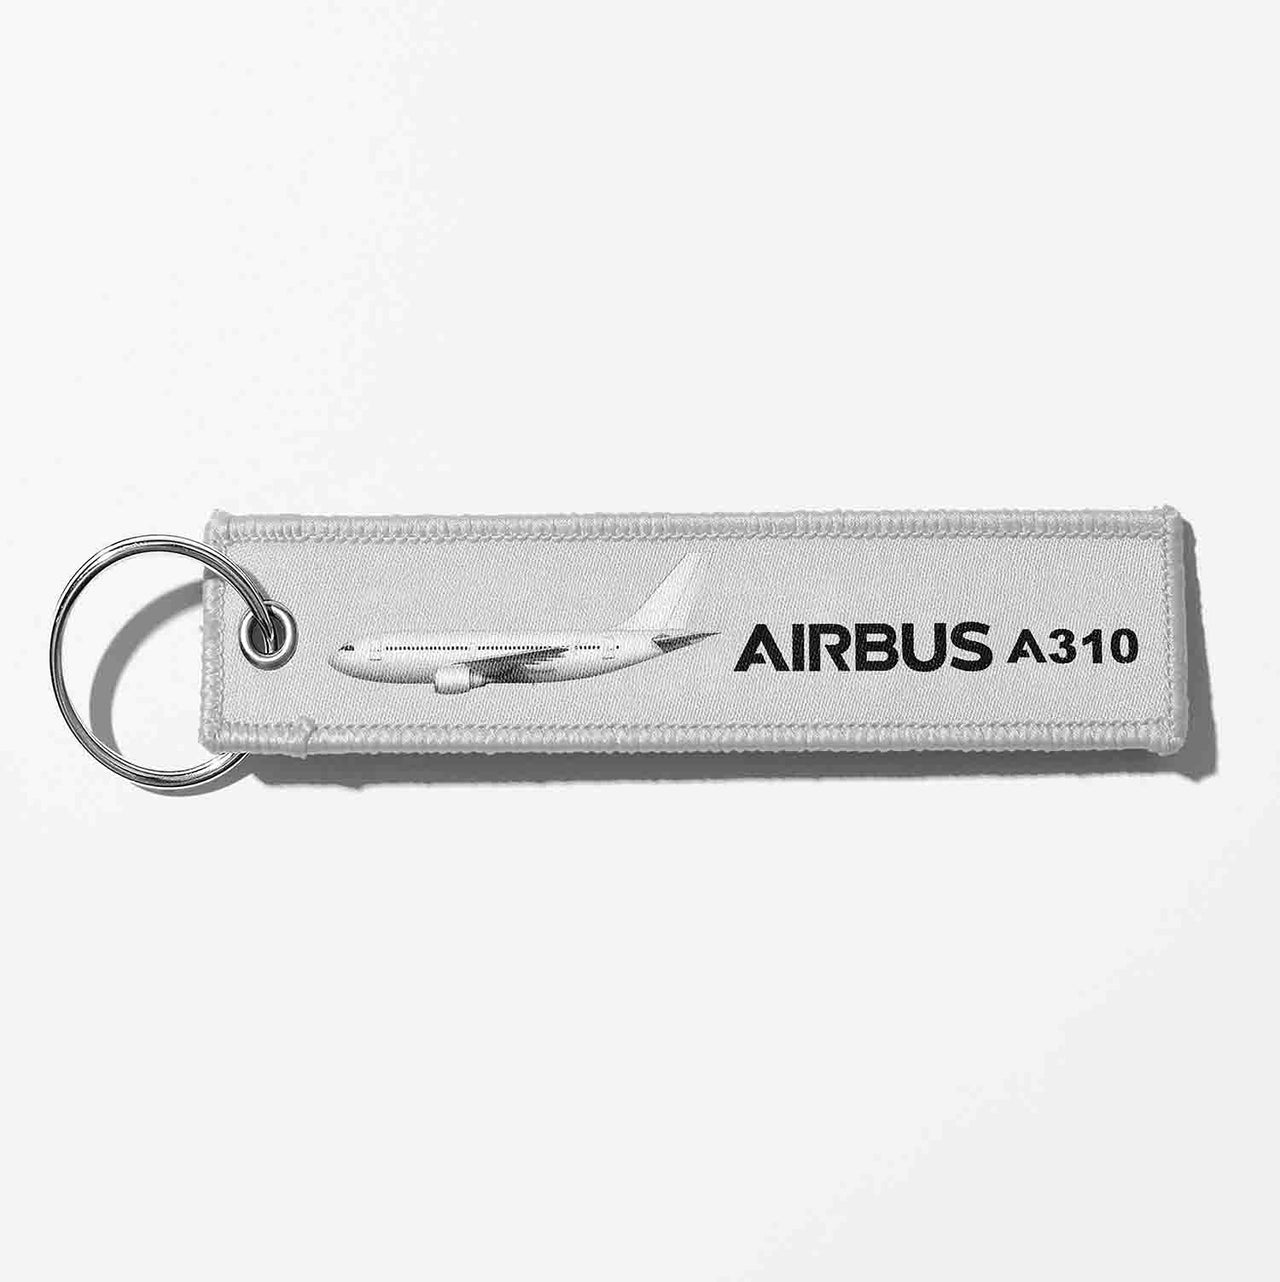 The Airbus A310 Designed Key Chains